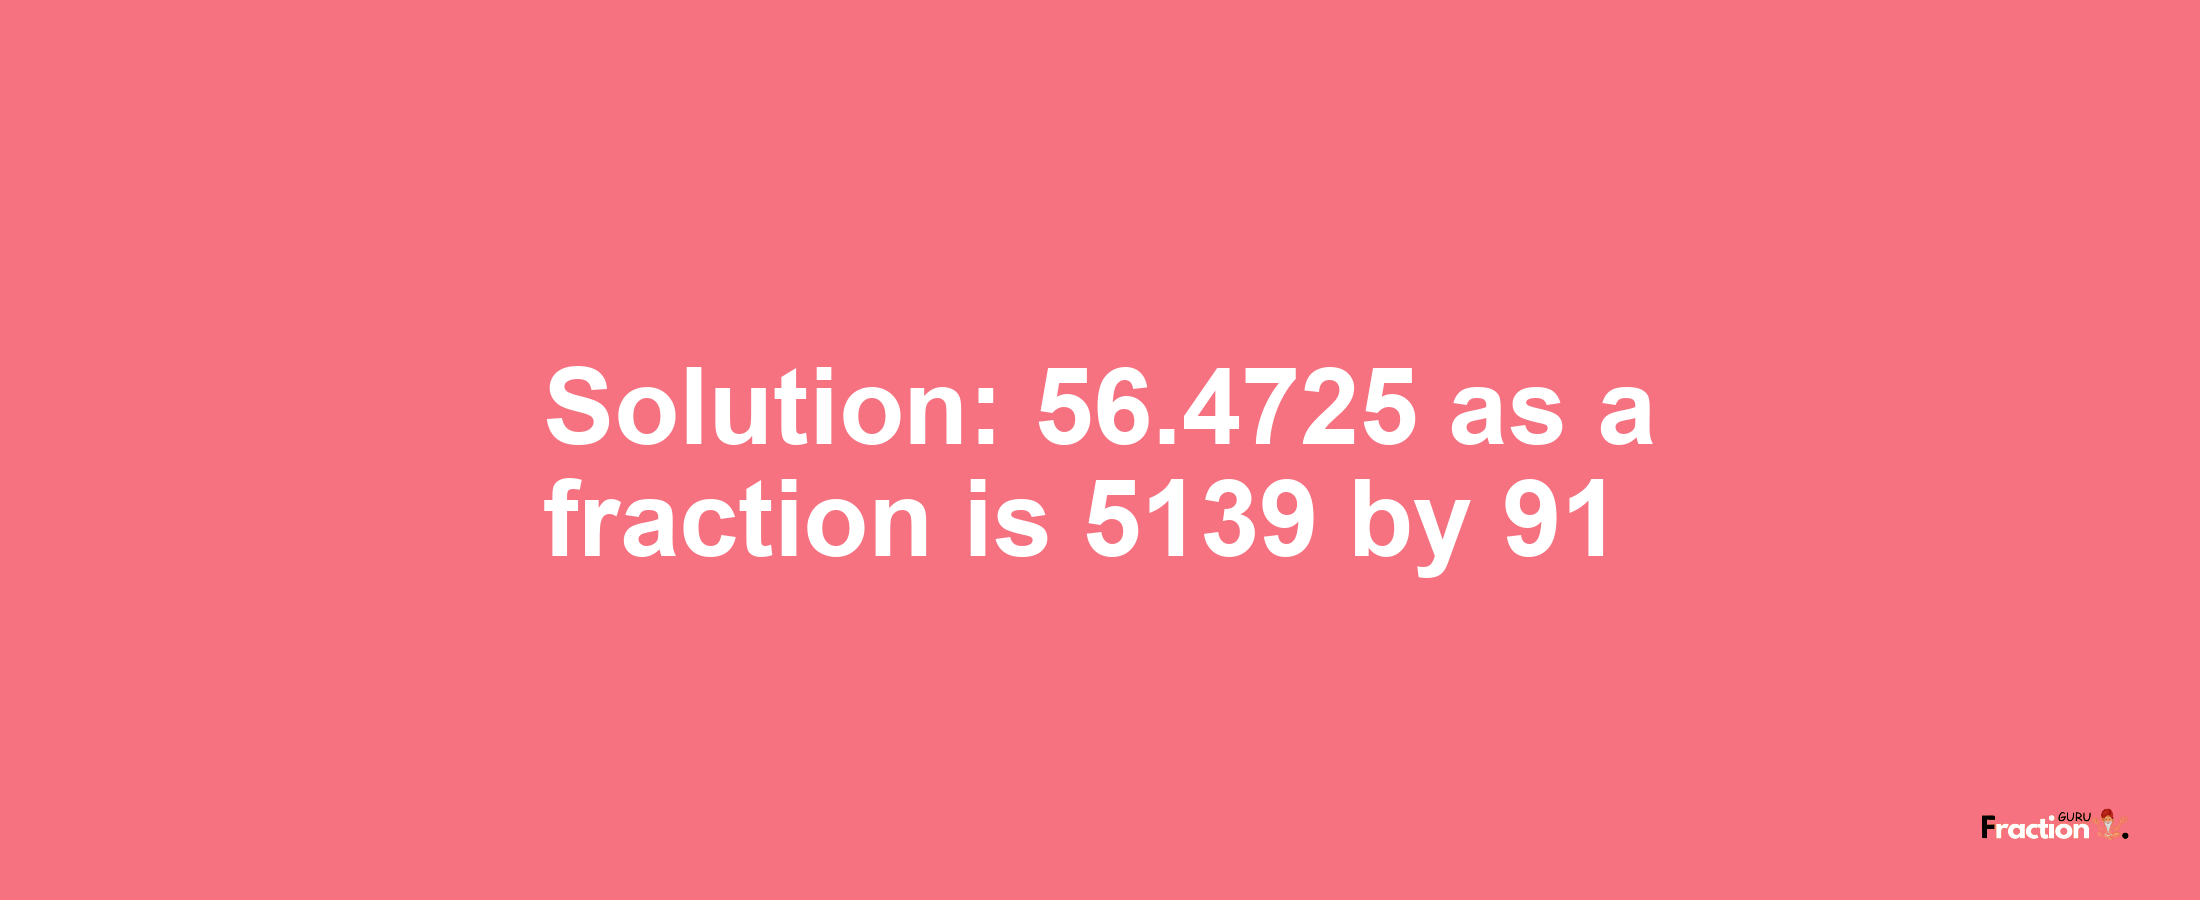 Solution:56.4725 as a fraction is 5139/91